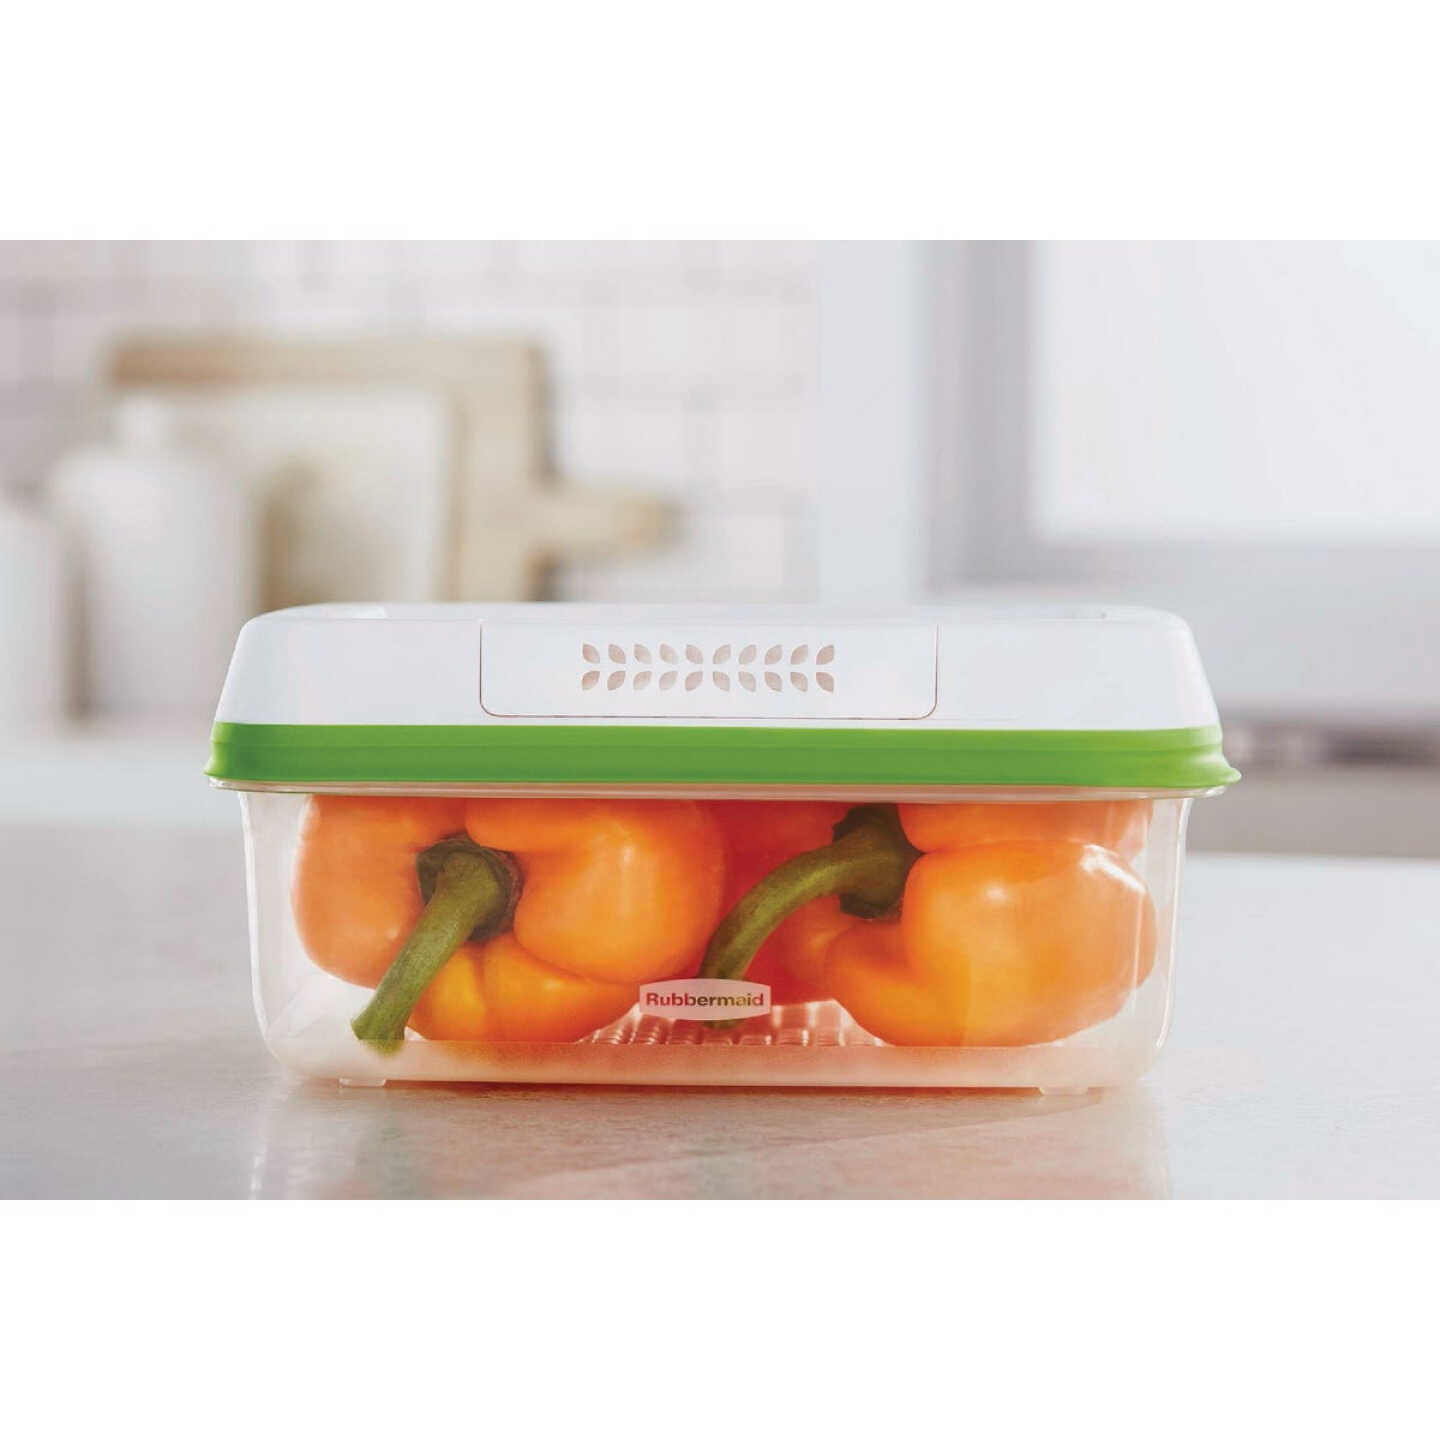 Rubbermaid FreshWorks Produce Saver, 18.1 Cup